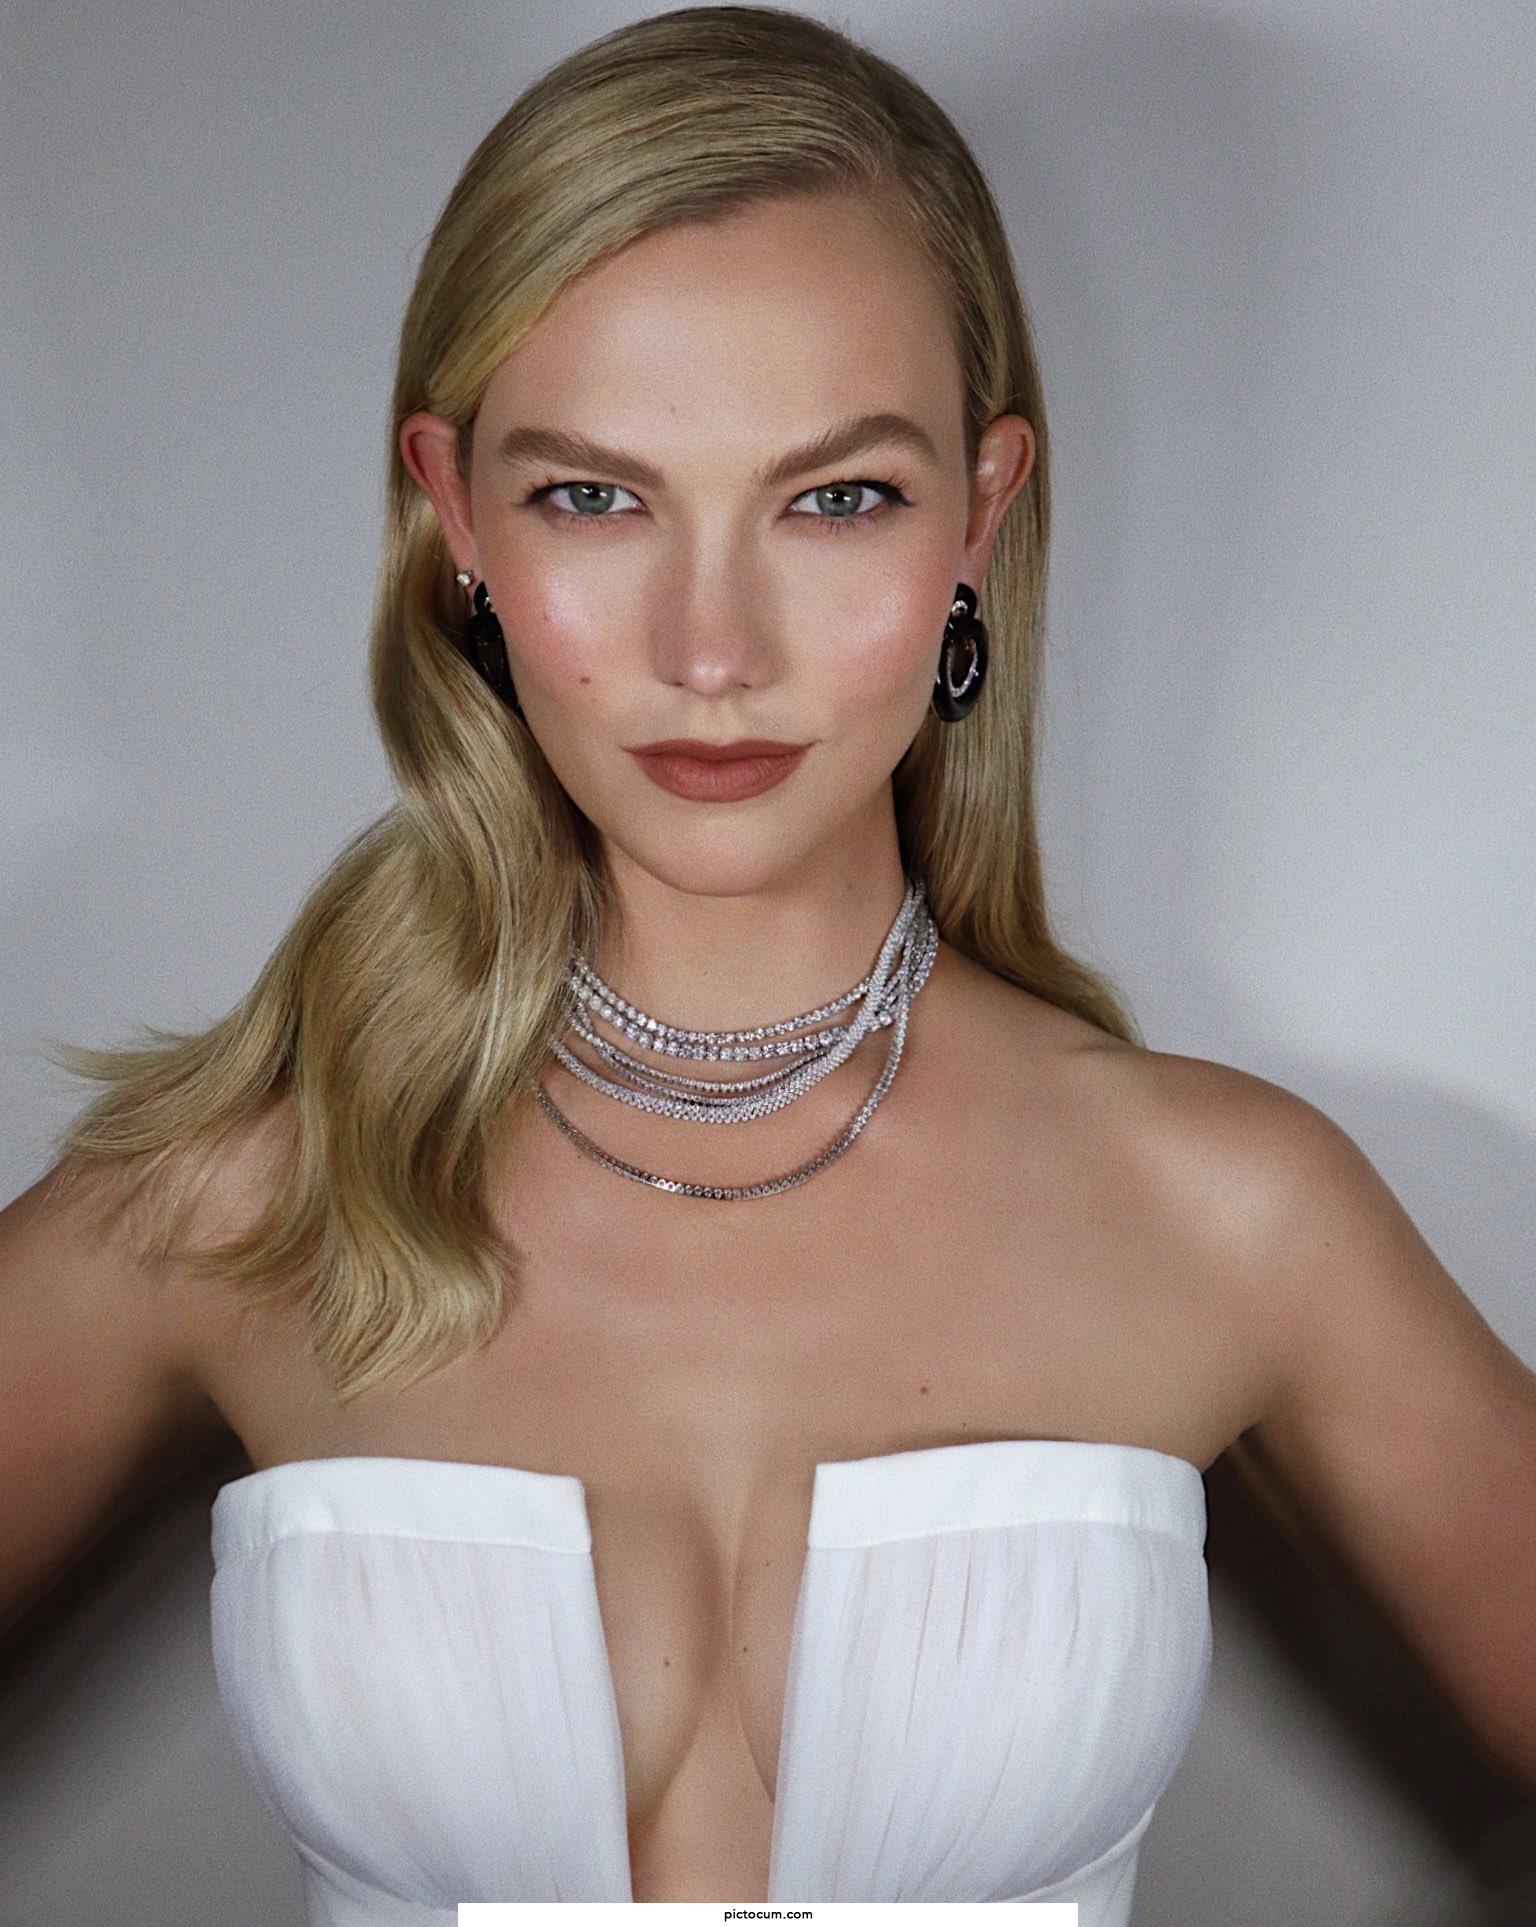 MILF Karlie Kloss Has Big Natural Tits and Needs Your Attention